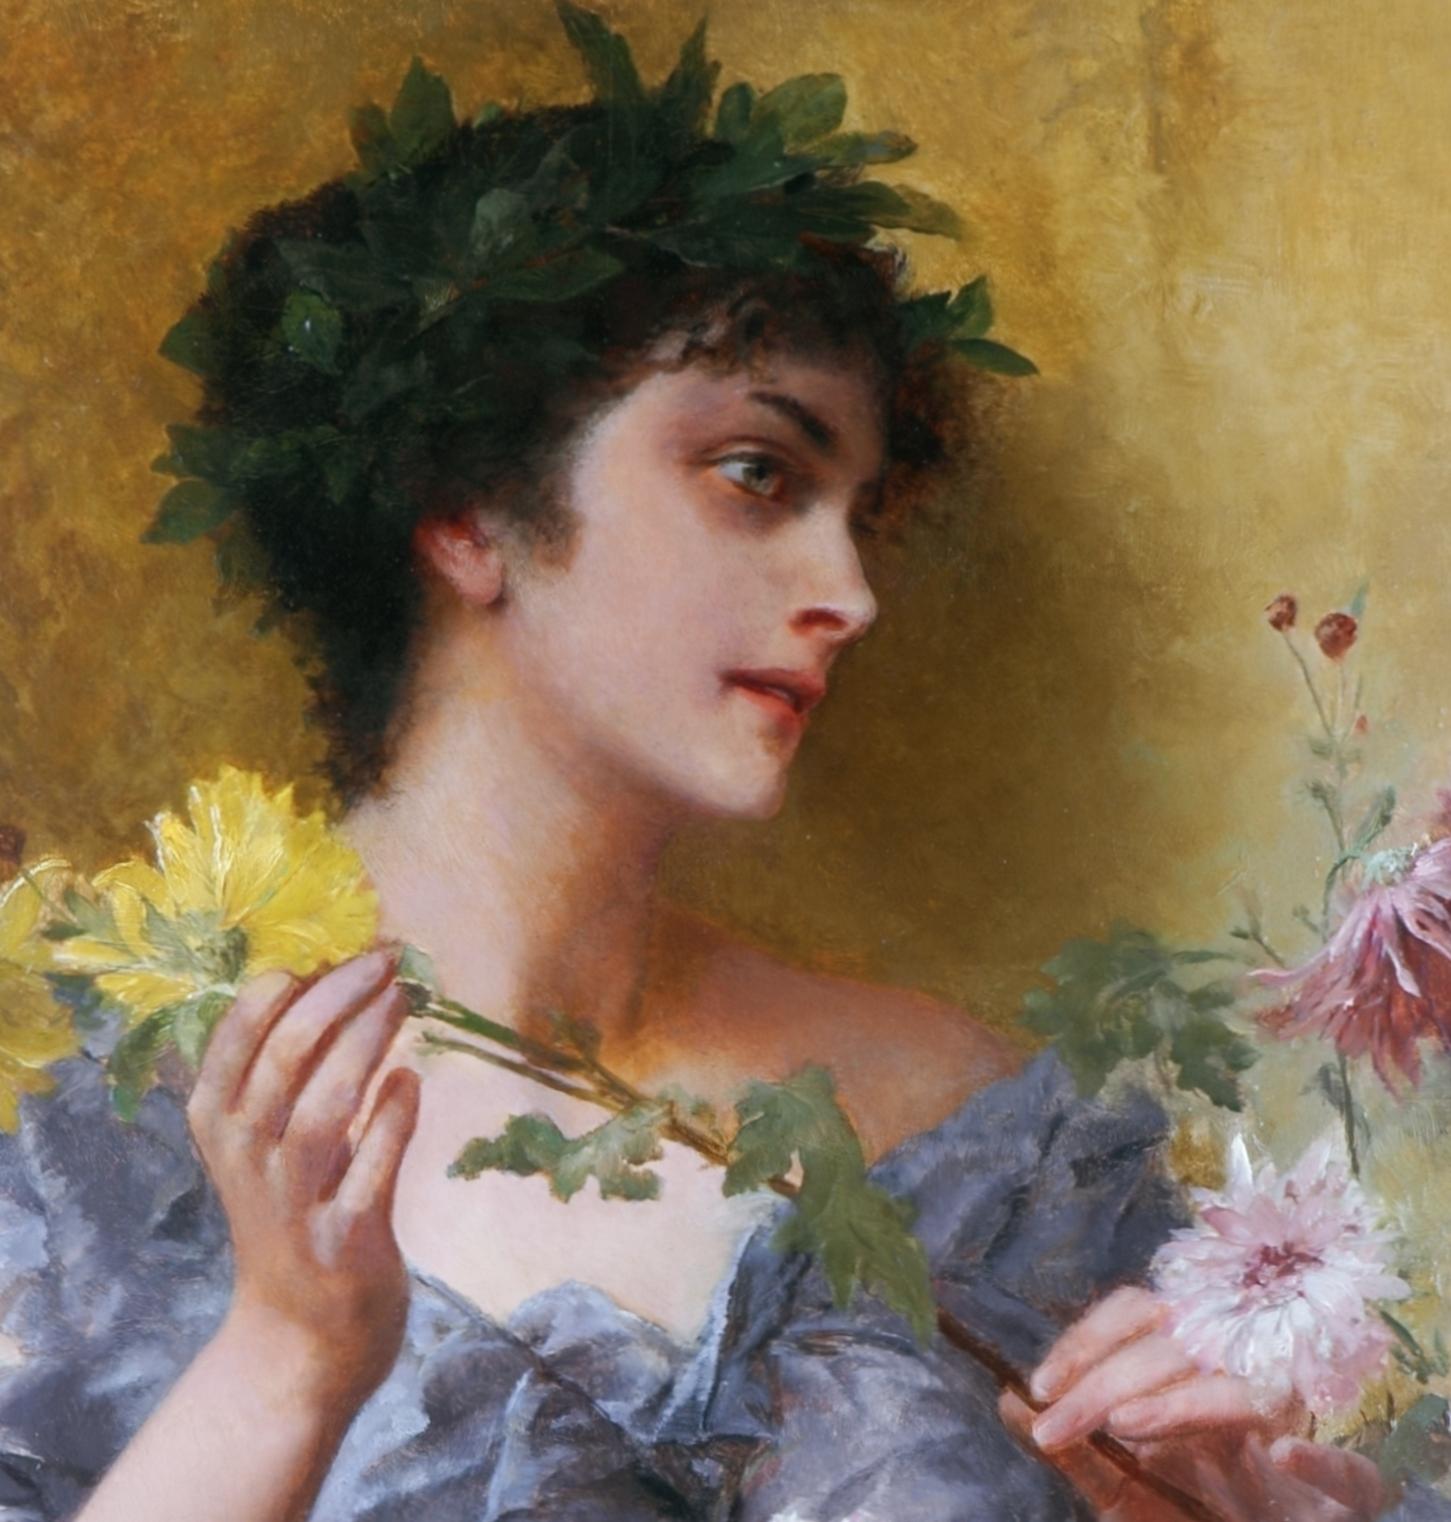 The gift of flowers - Painting by Conrad Kiesel